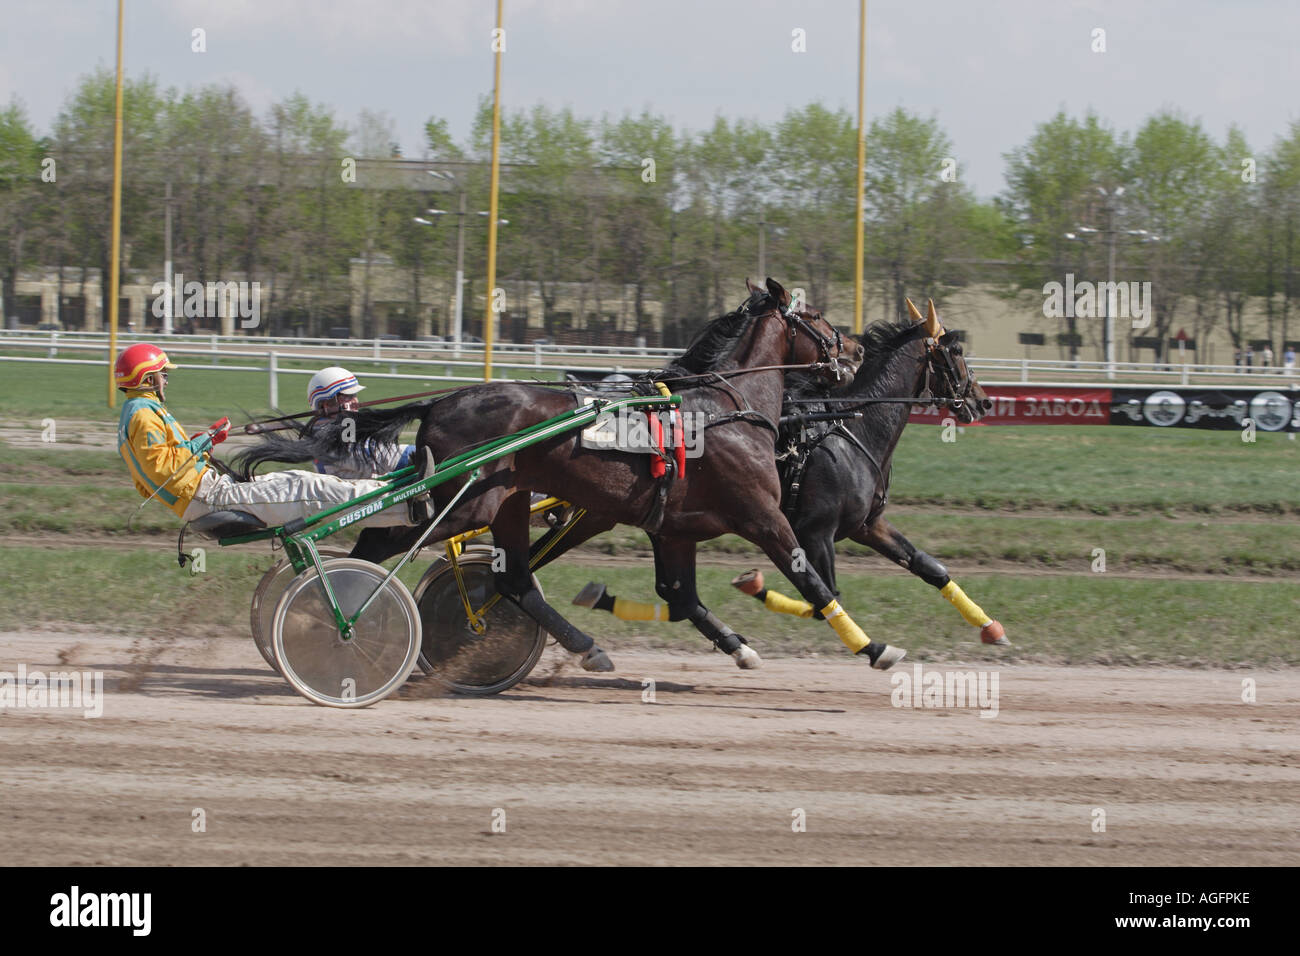 Harness racing is also popular in the France. Stock Photo